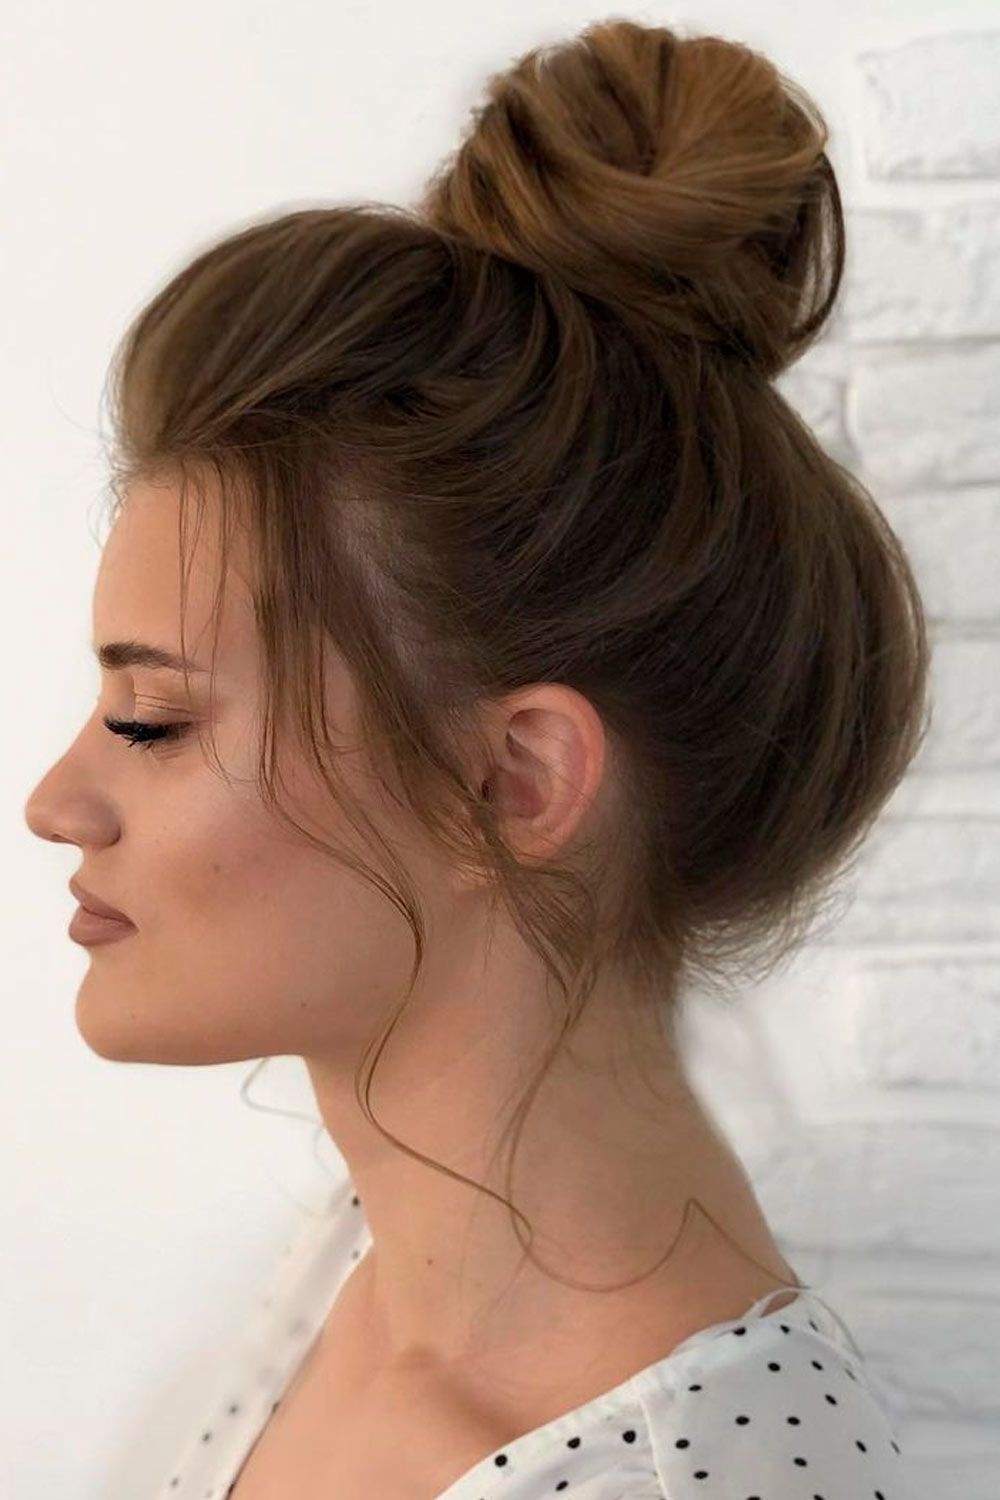 Updos For Medium Length Hair | Lovehairstyles Regarding Most Current Medium Length Hairstyles With Top Knot (View 25 of 25)